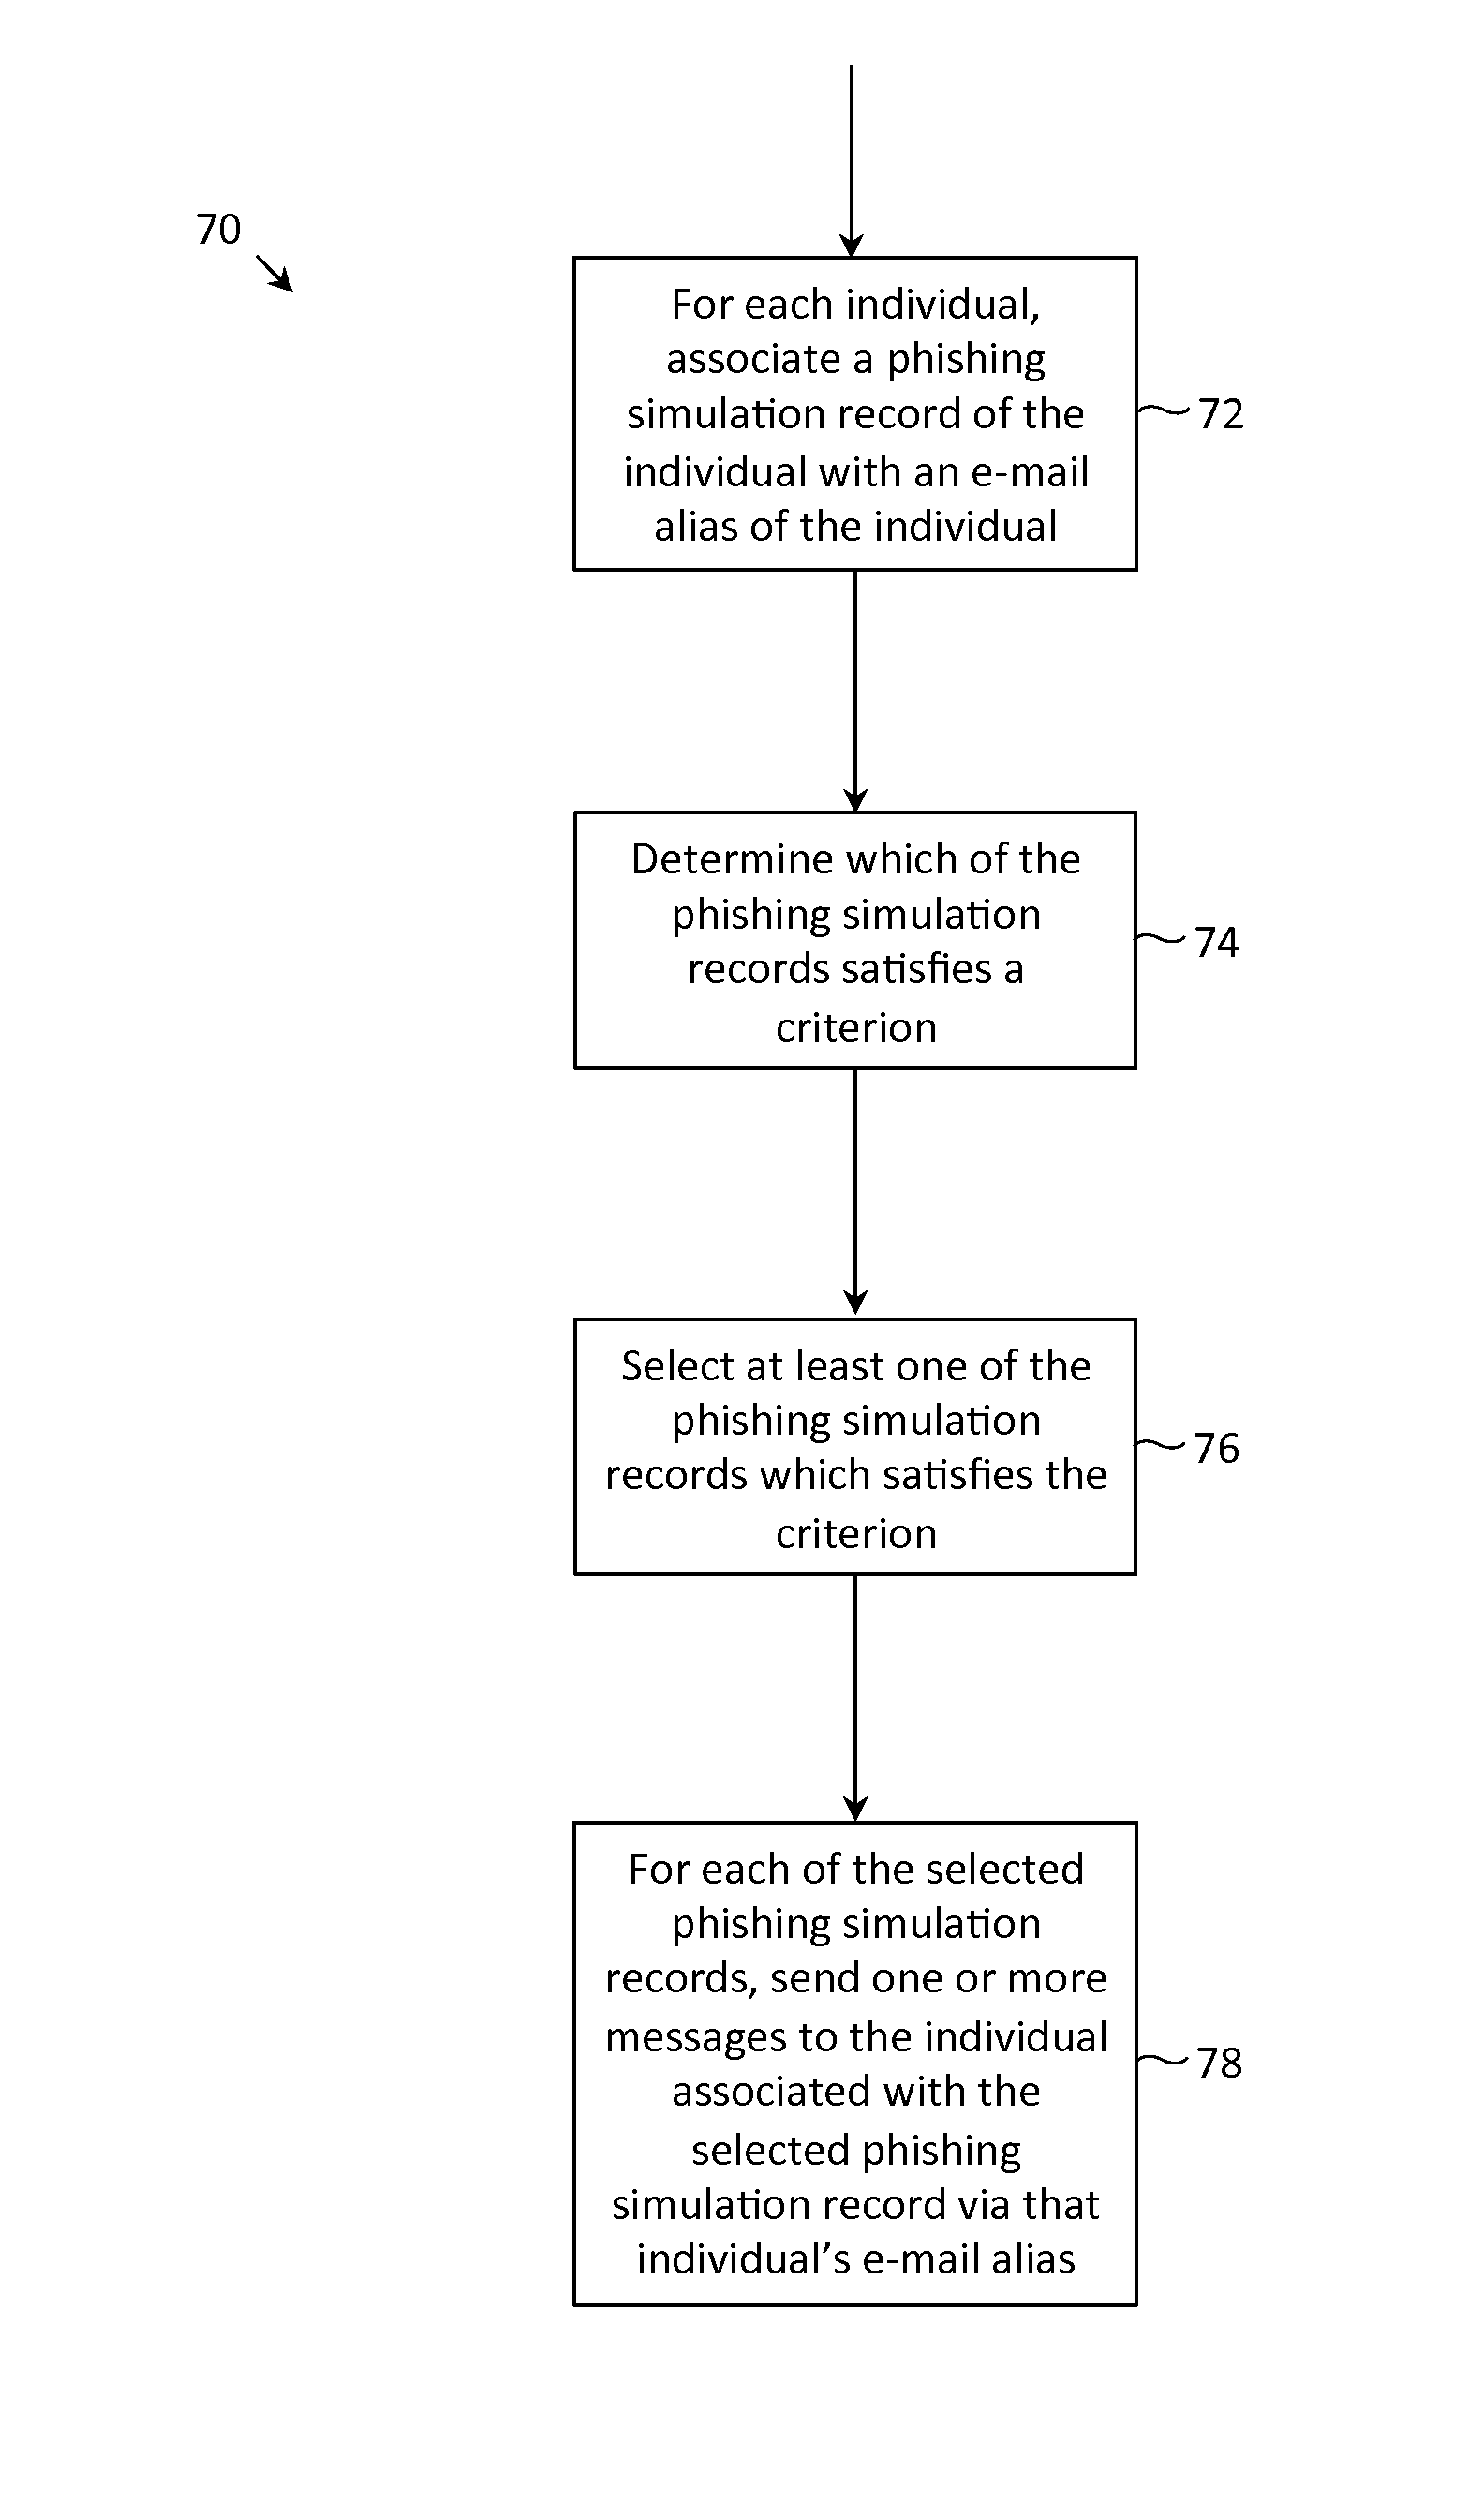 Methods and systems for preventing malicious use of phishing simulation records